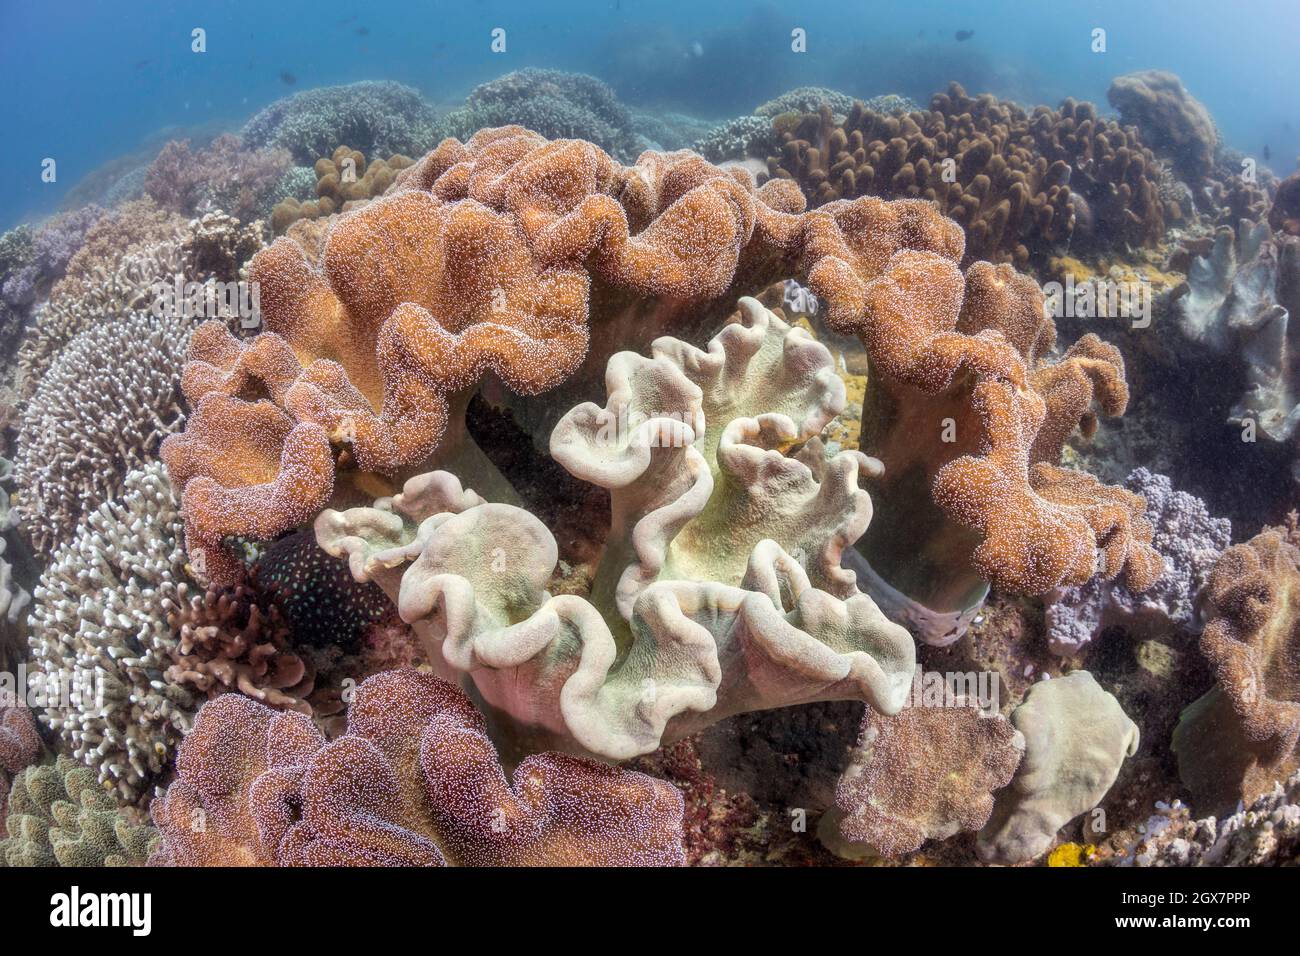 The central colony of leather coral, Sarcophyton tracheliophorum, has its polyps with drawn. The surrounding colonies polyps are extended and feeding, Stock Photo